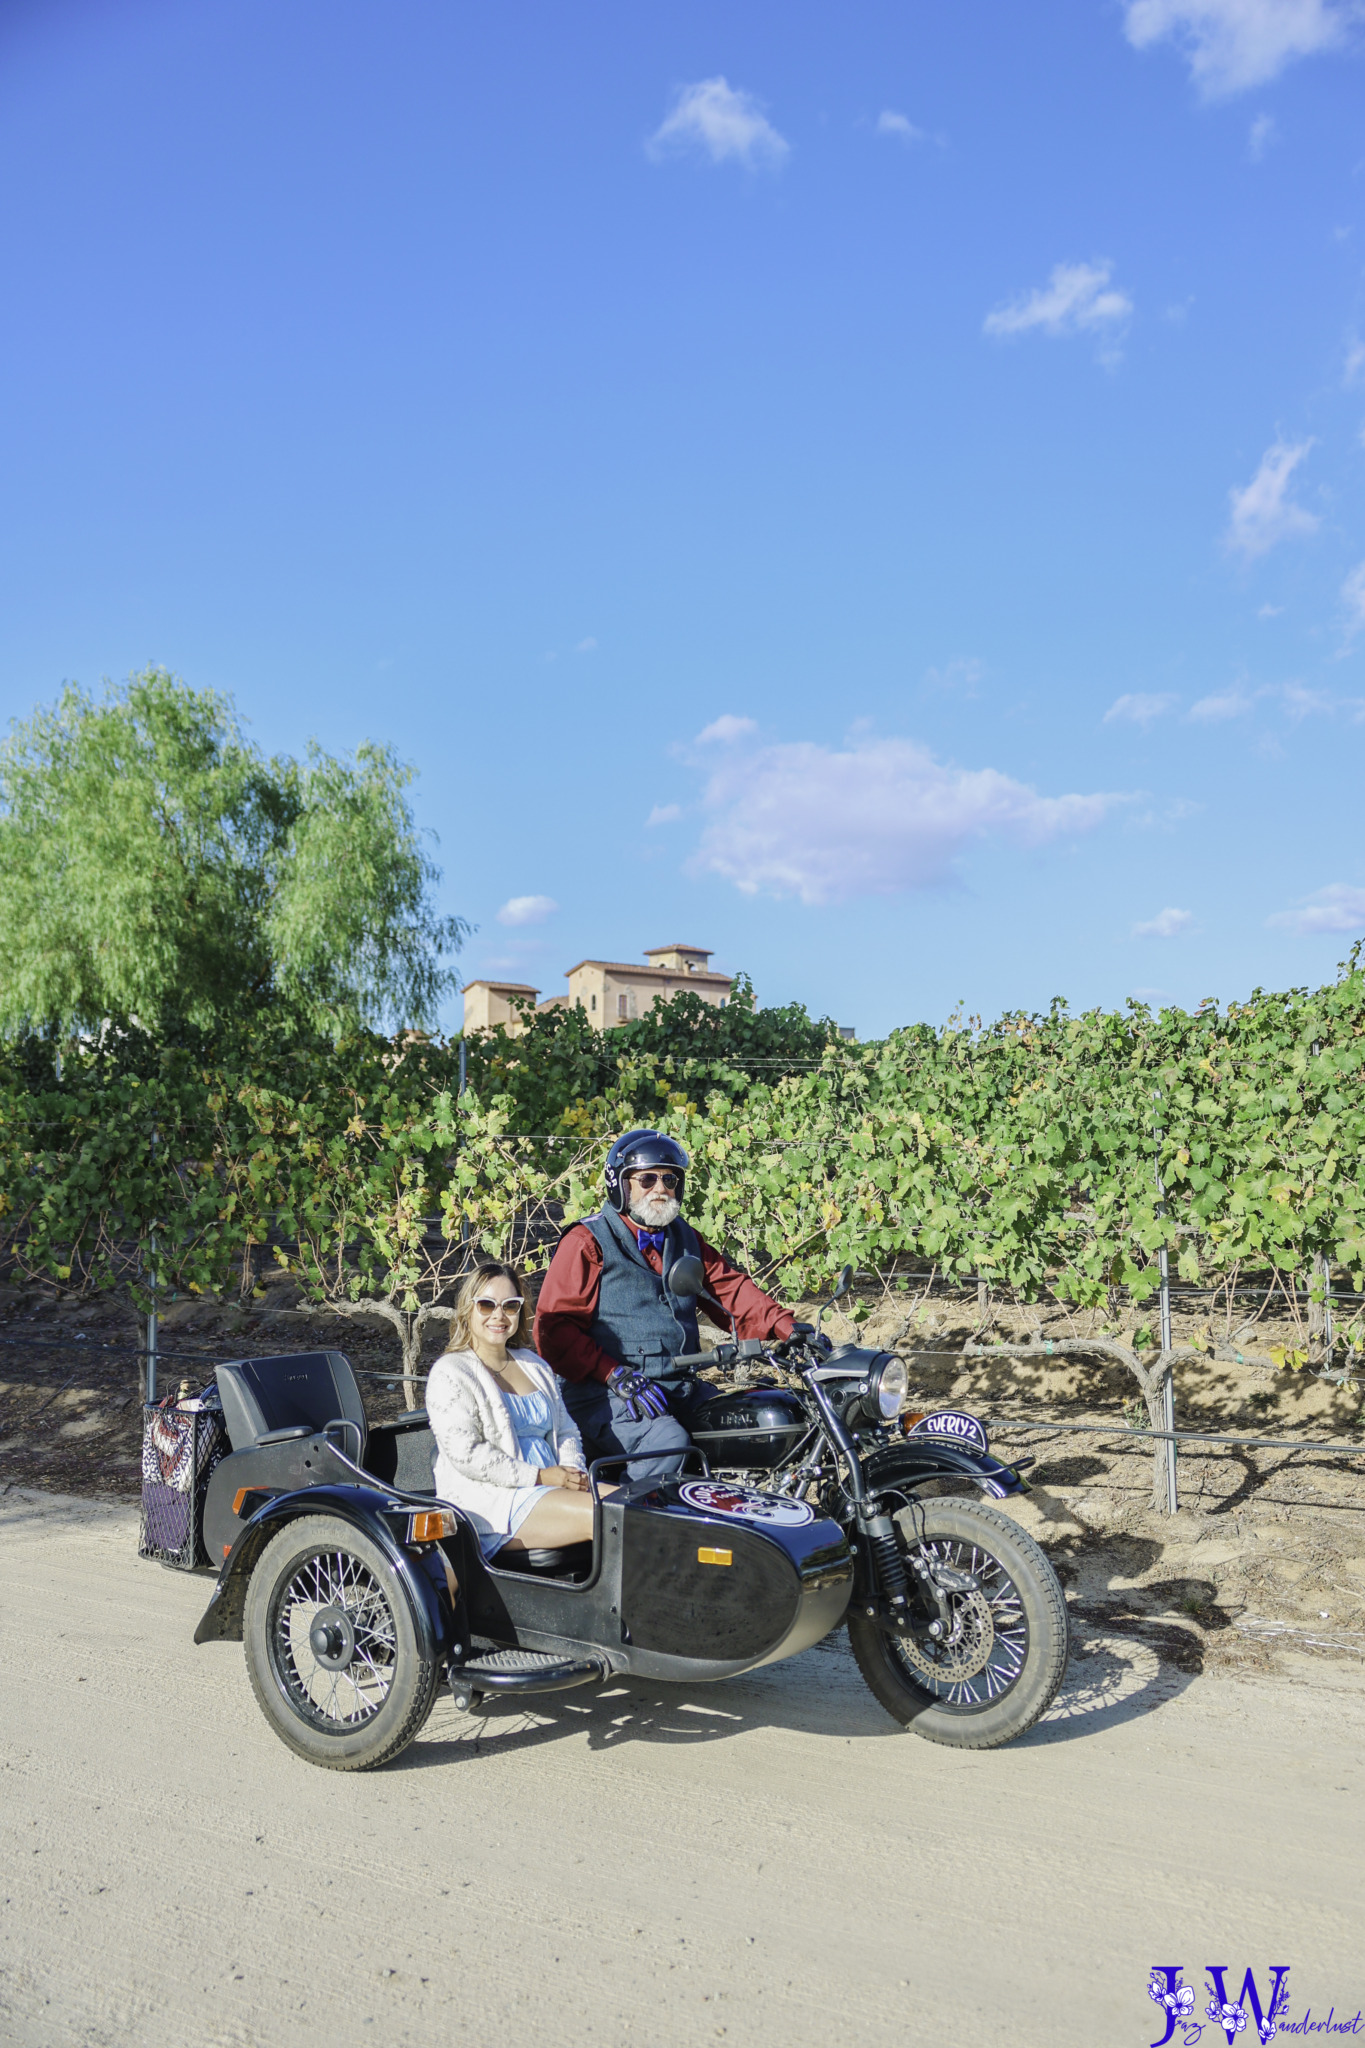 Temecula Side Car tours in Temecula Valley. Photography by Jaz Wanderlust.